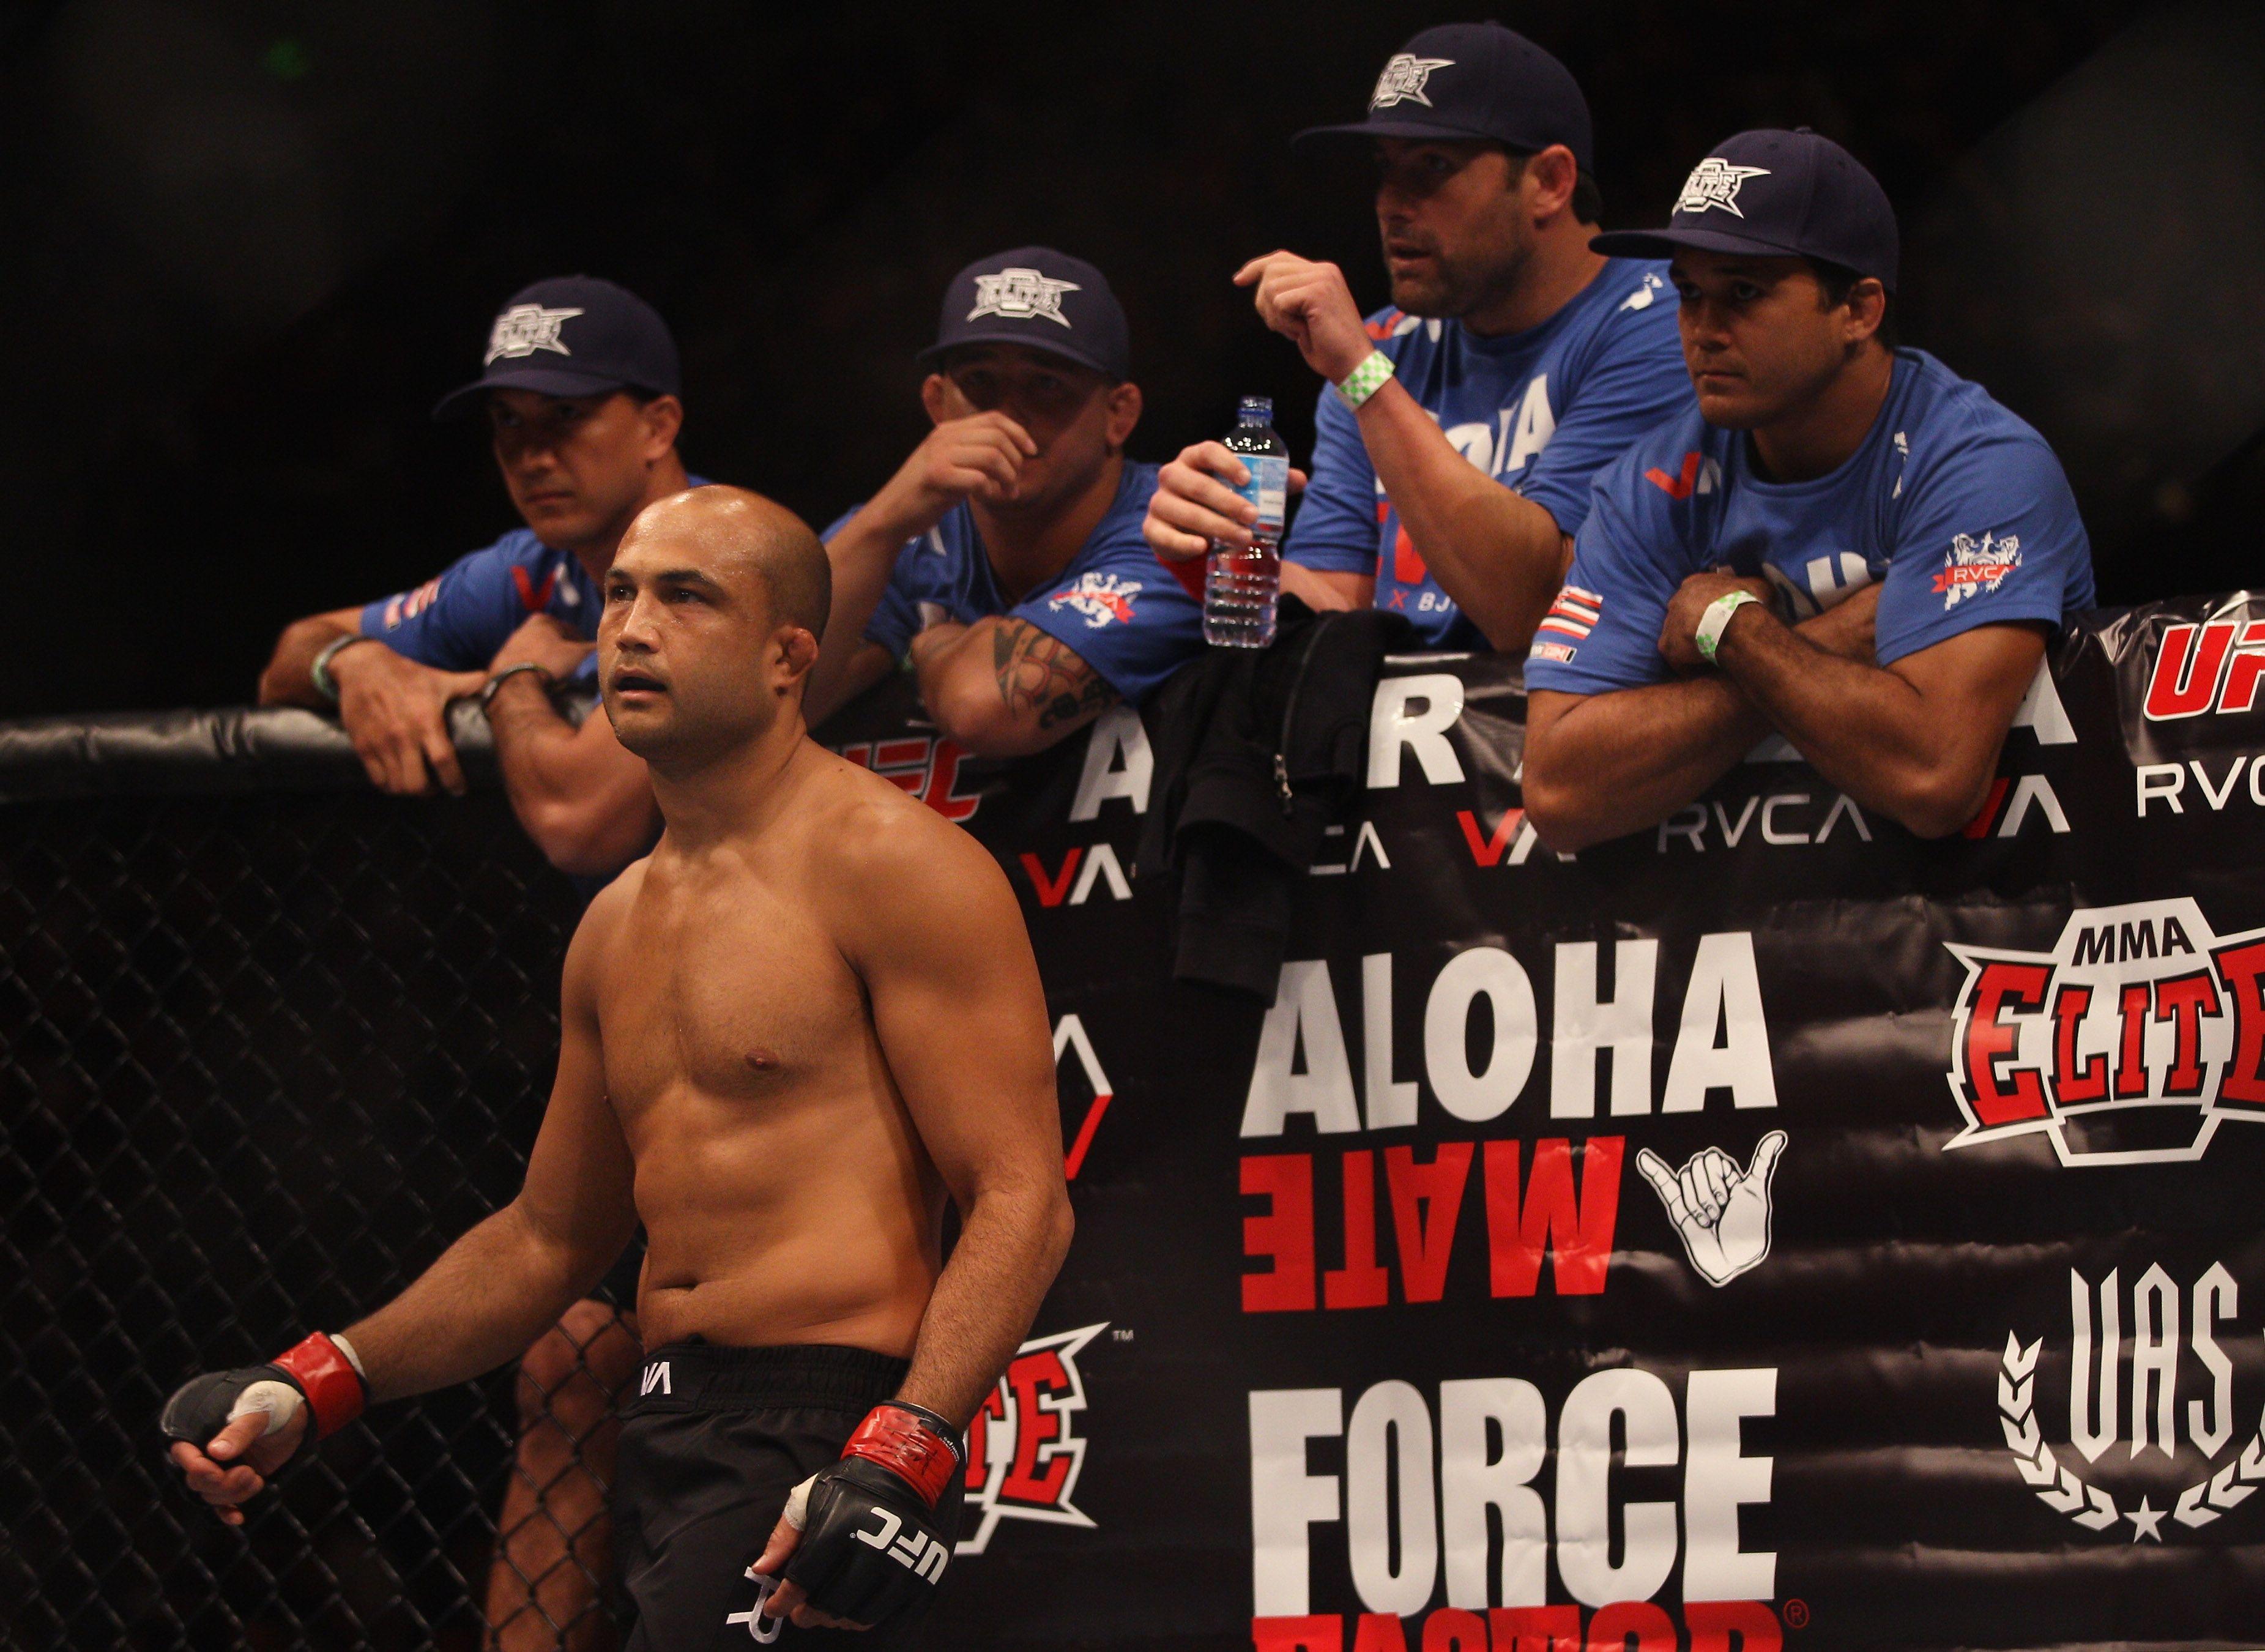 BJ Penn and the Fighters with Total Strikes Landed in UFC